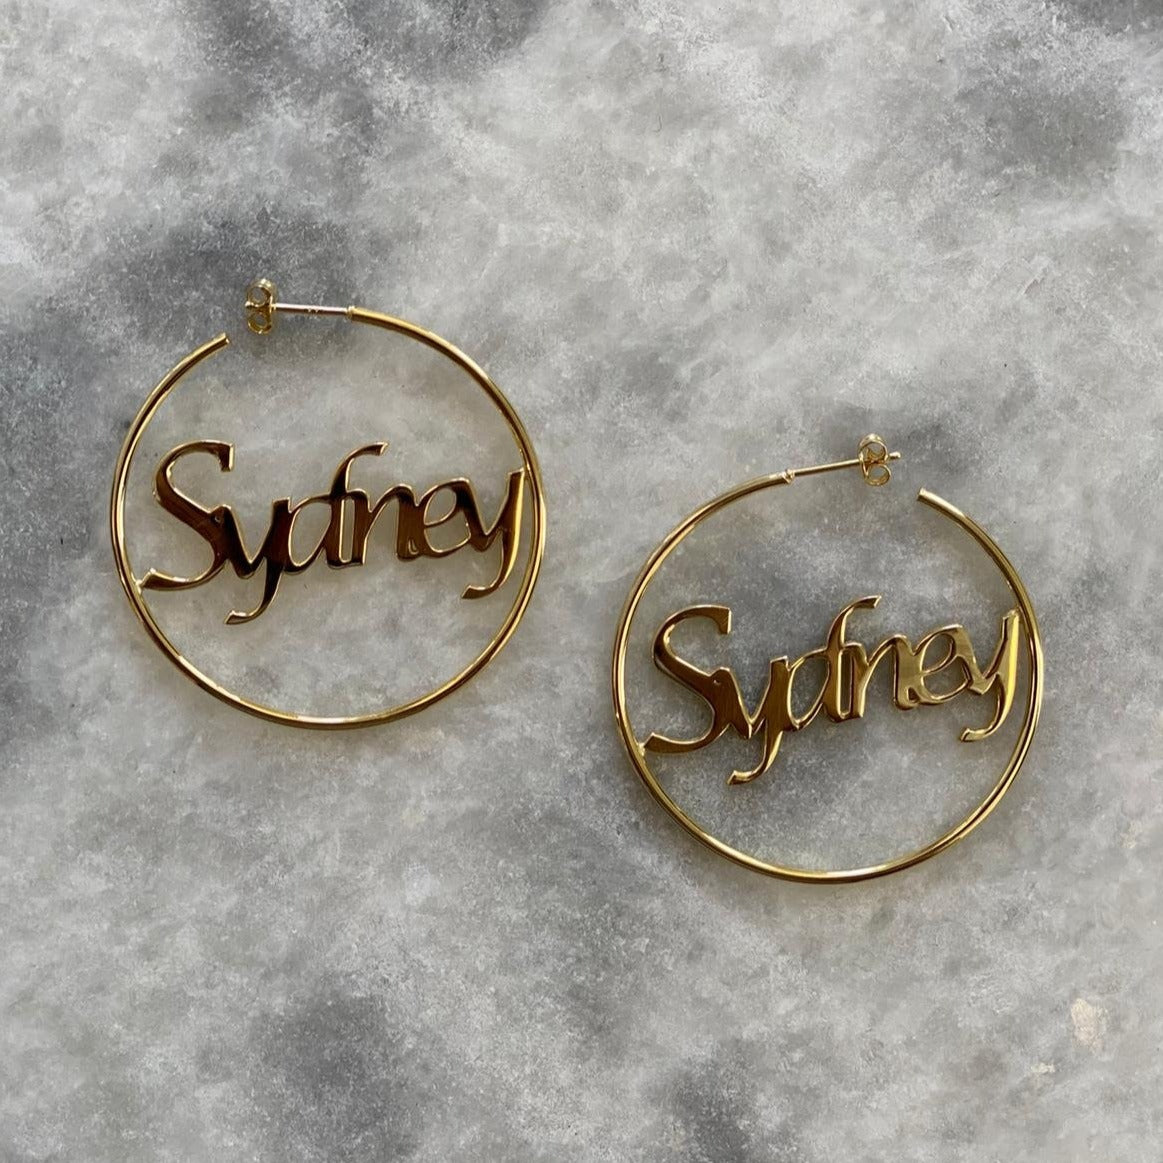 Sydney Name Hoops - Retail Therapy Jewelry